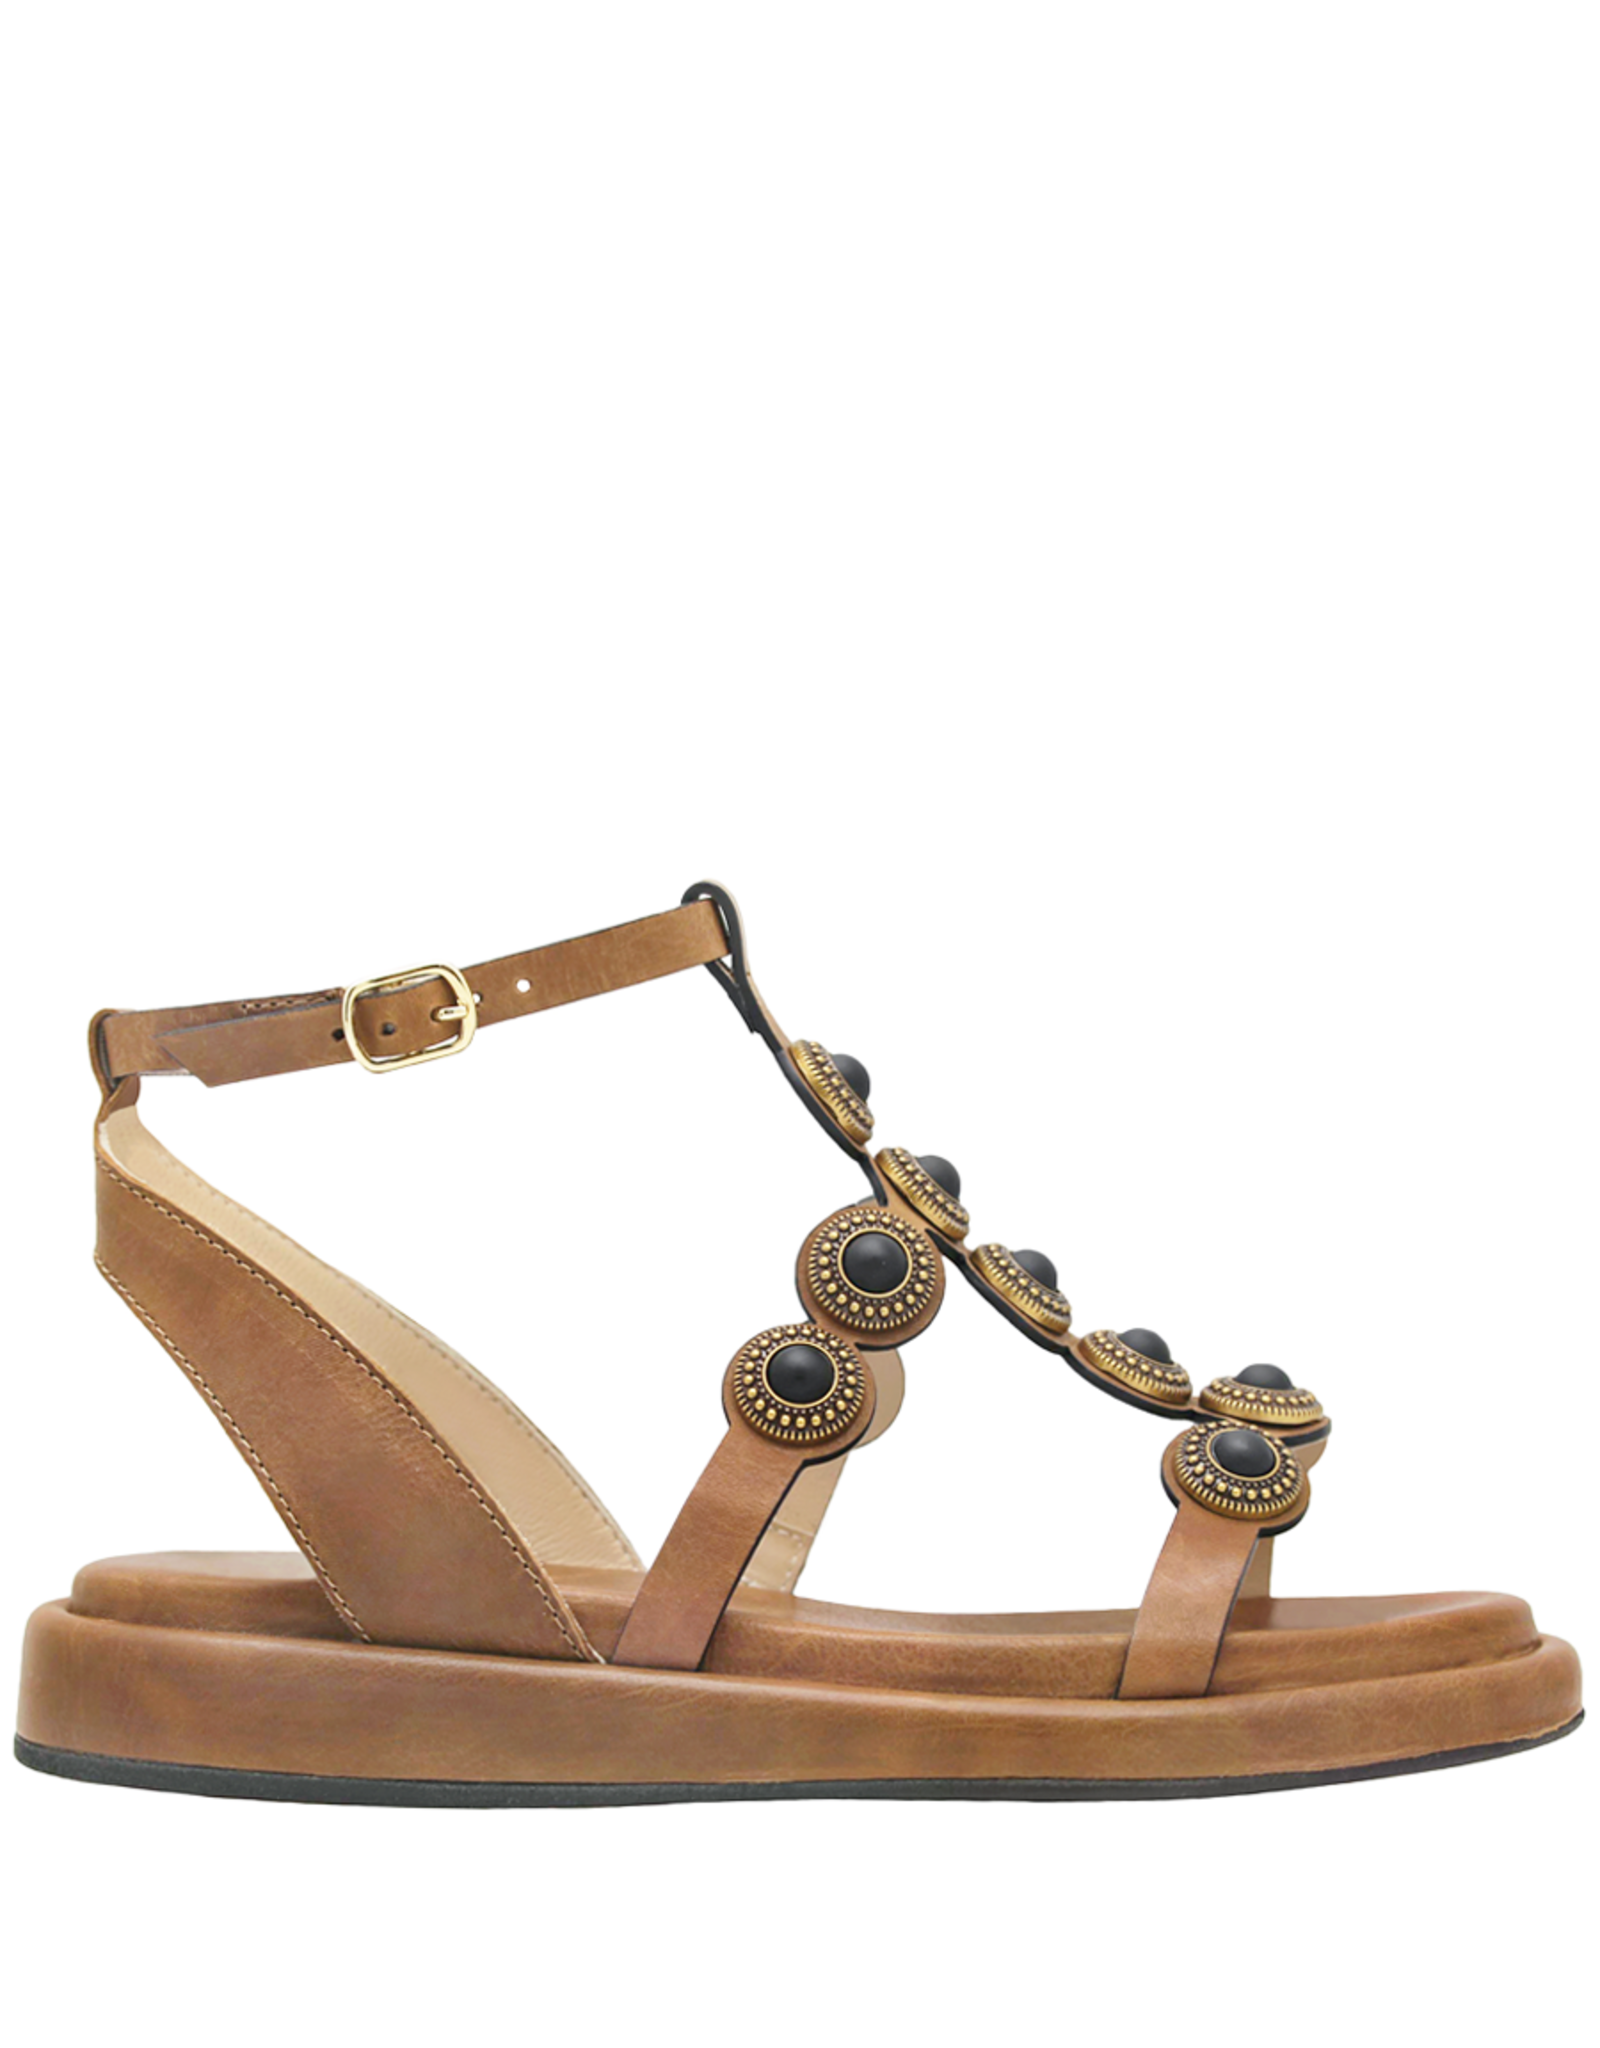 Now Now Camel T-Strap with Jewels 7442